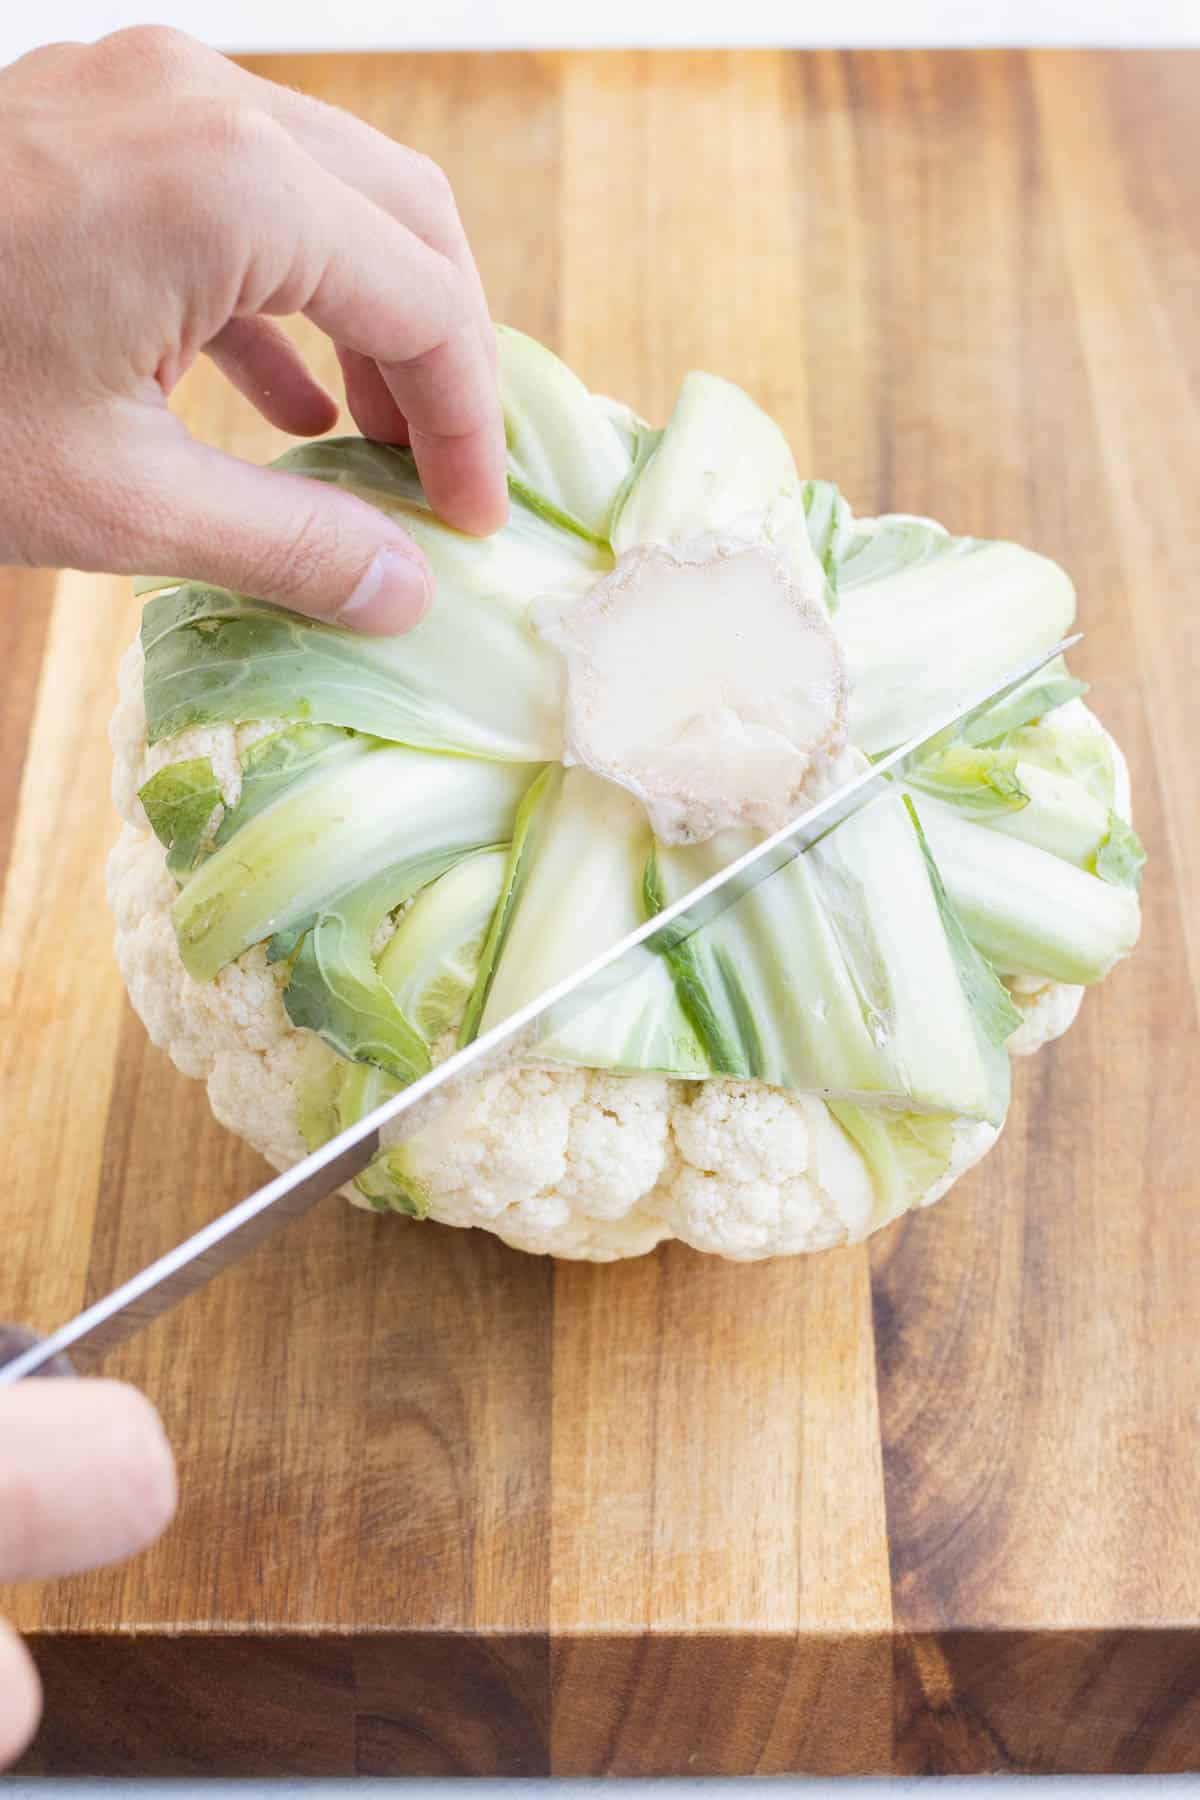 A knife slices away the leaves from a head of cauliflower.